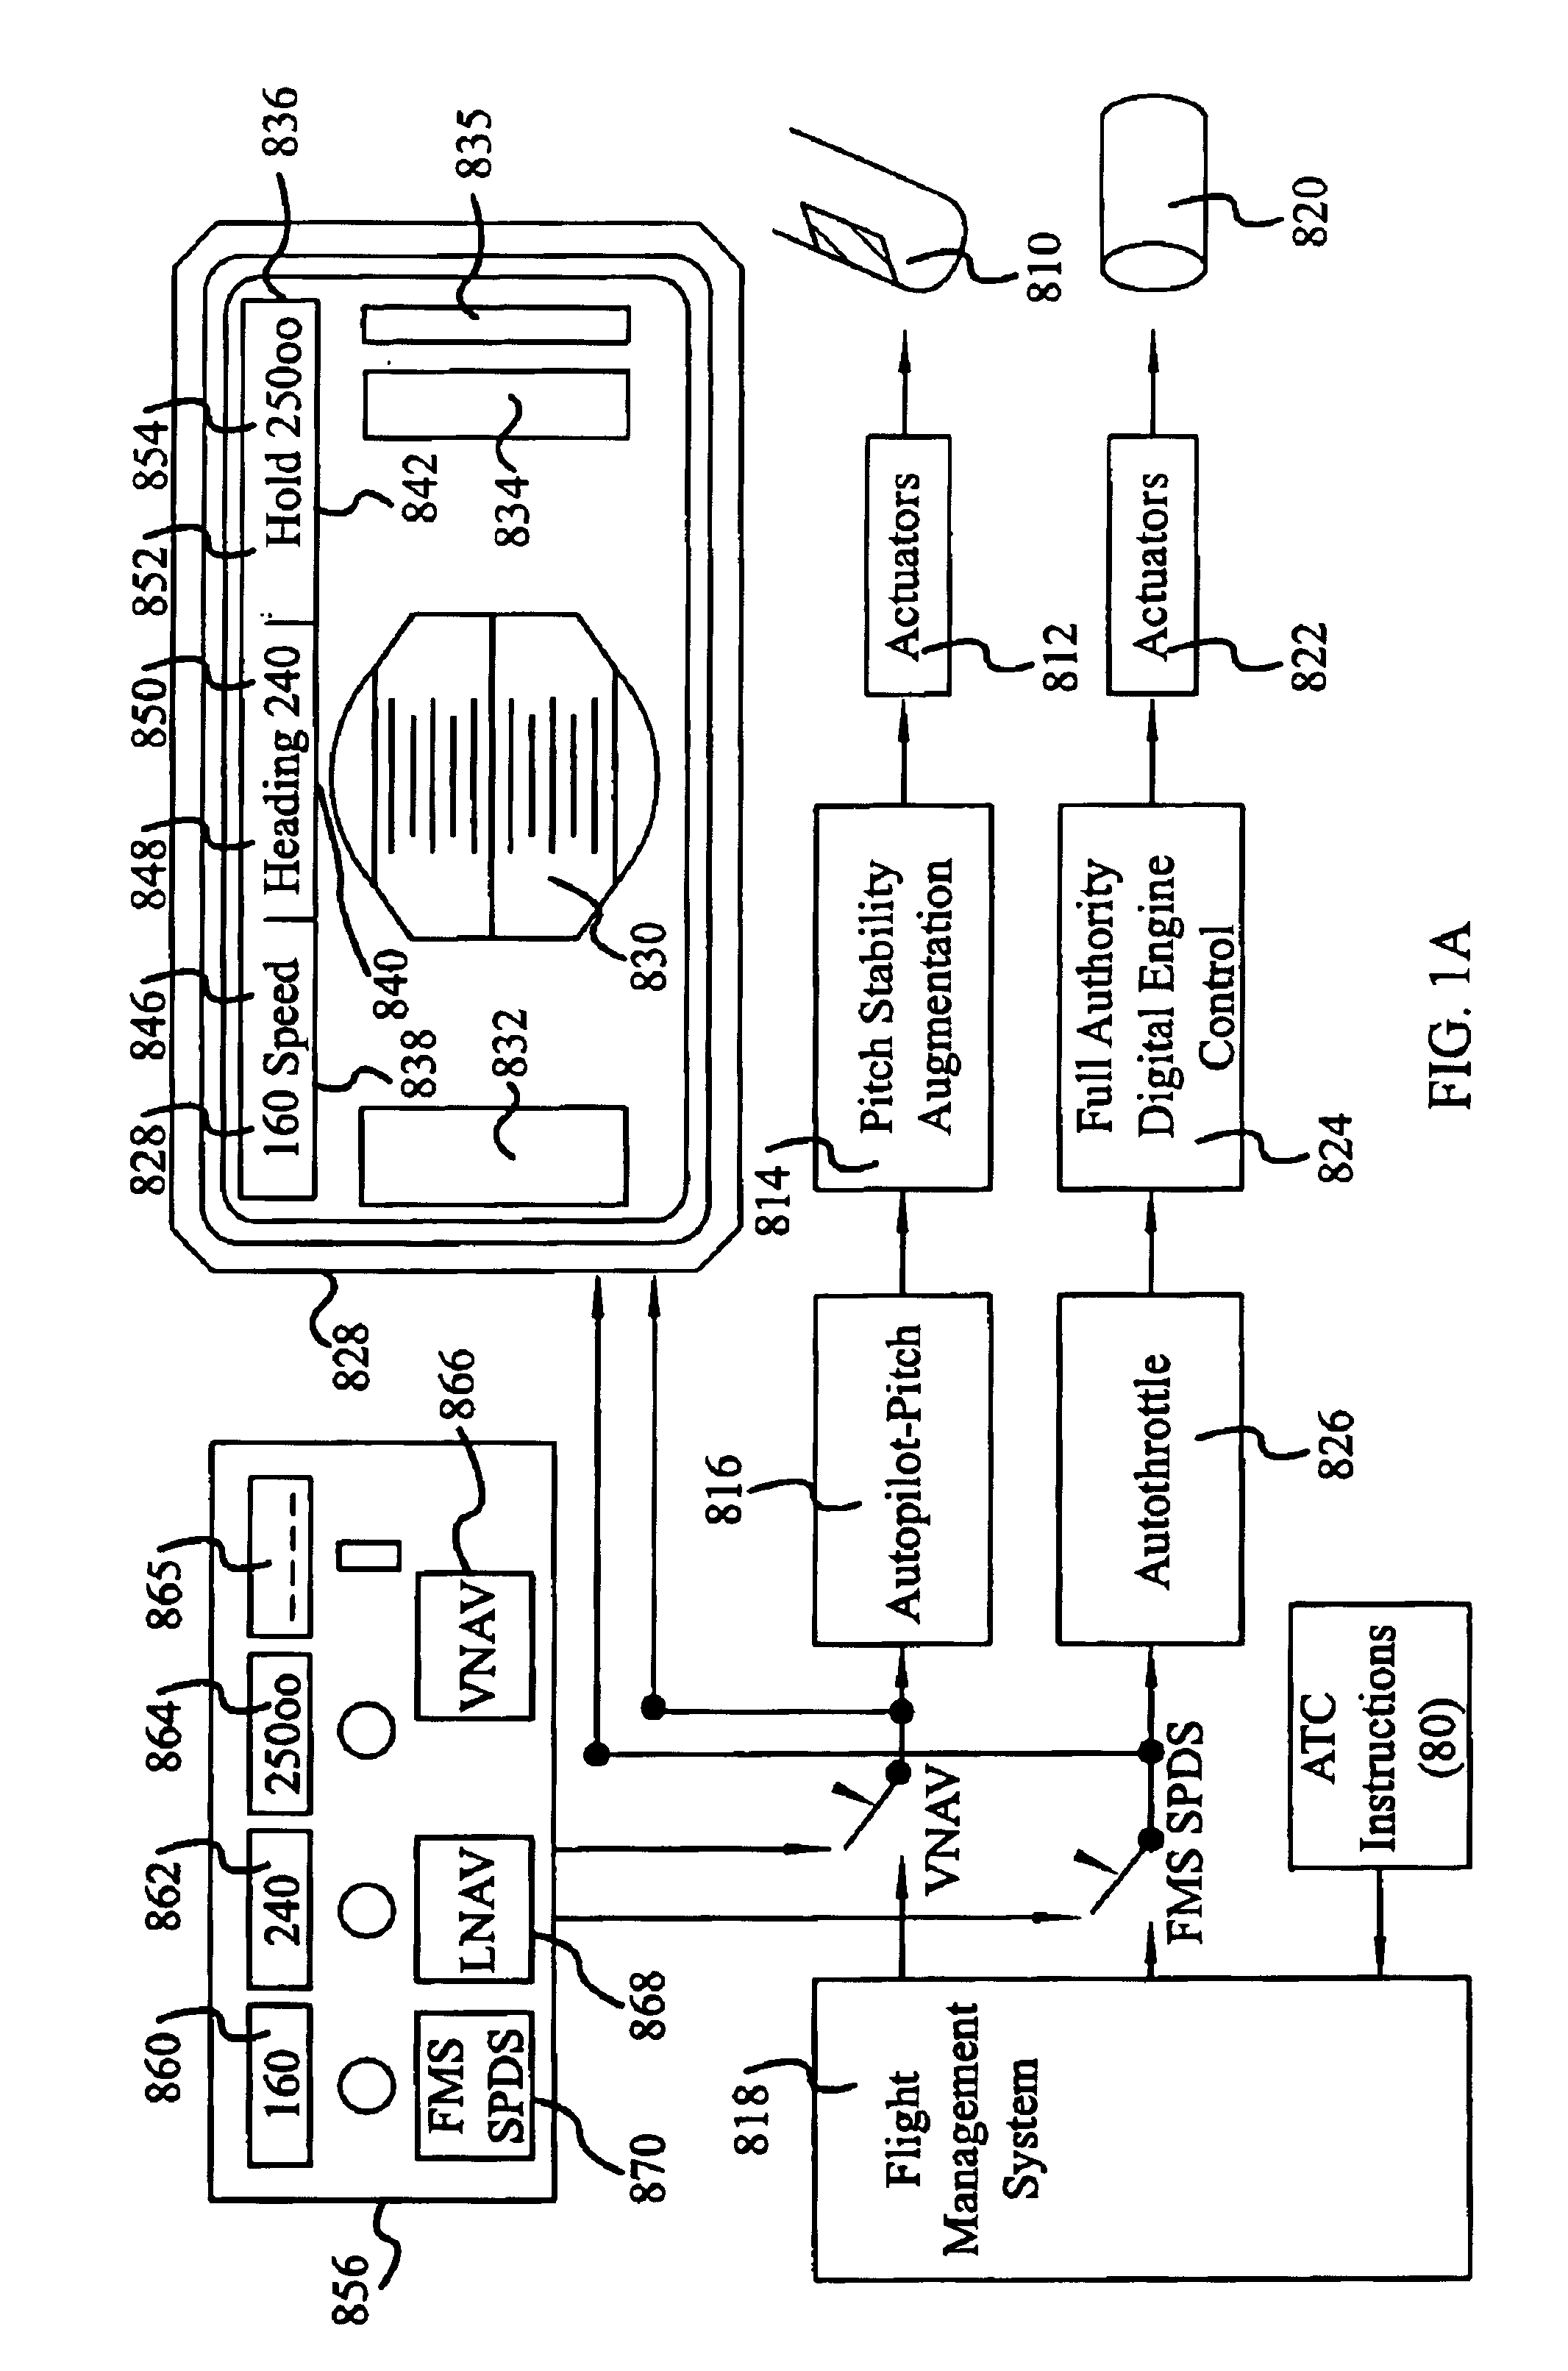 Display of altitude and path capture trajectories